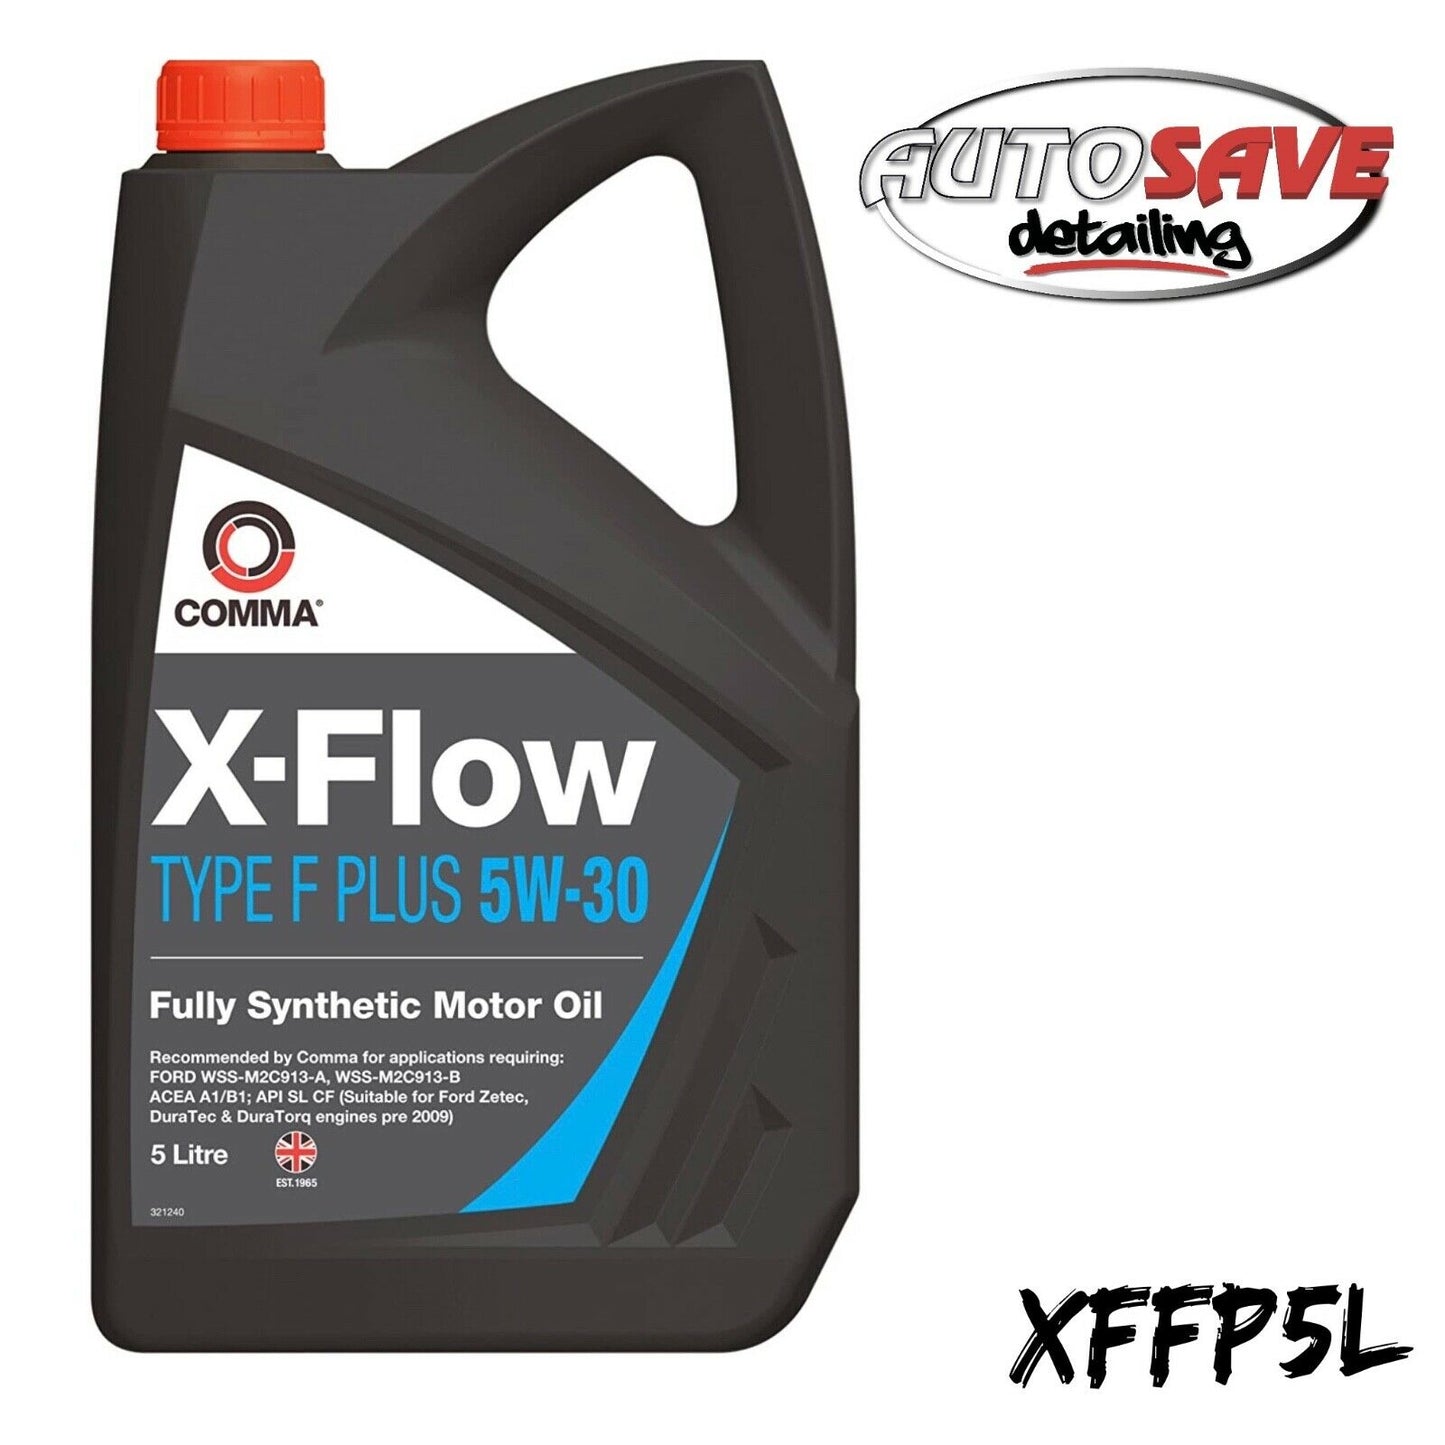 COMMA XFLOW 5W-30 FULLY SYNTHETIC ENGINE OIL -XFFP5L - 5 LITRE-FORD WSS-M2C913-B